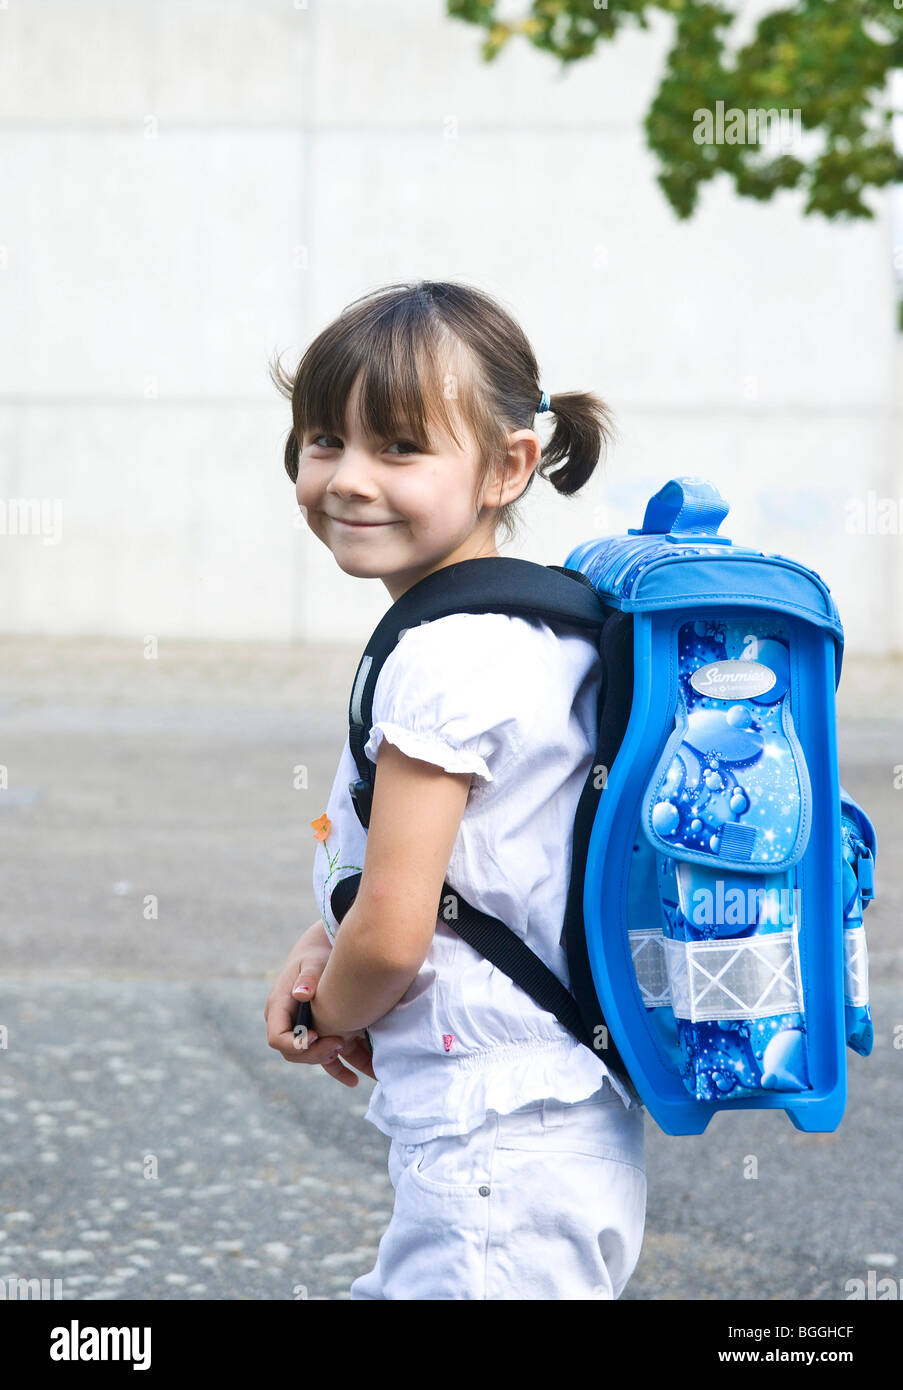 Girl carrying school bag, side view Stock Photo - Alamy